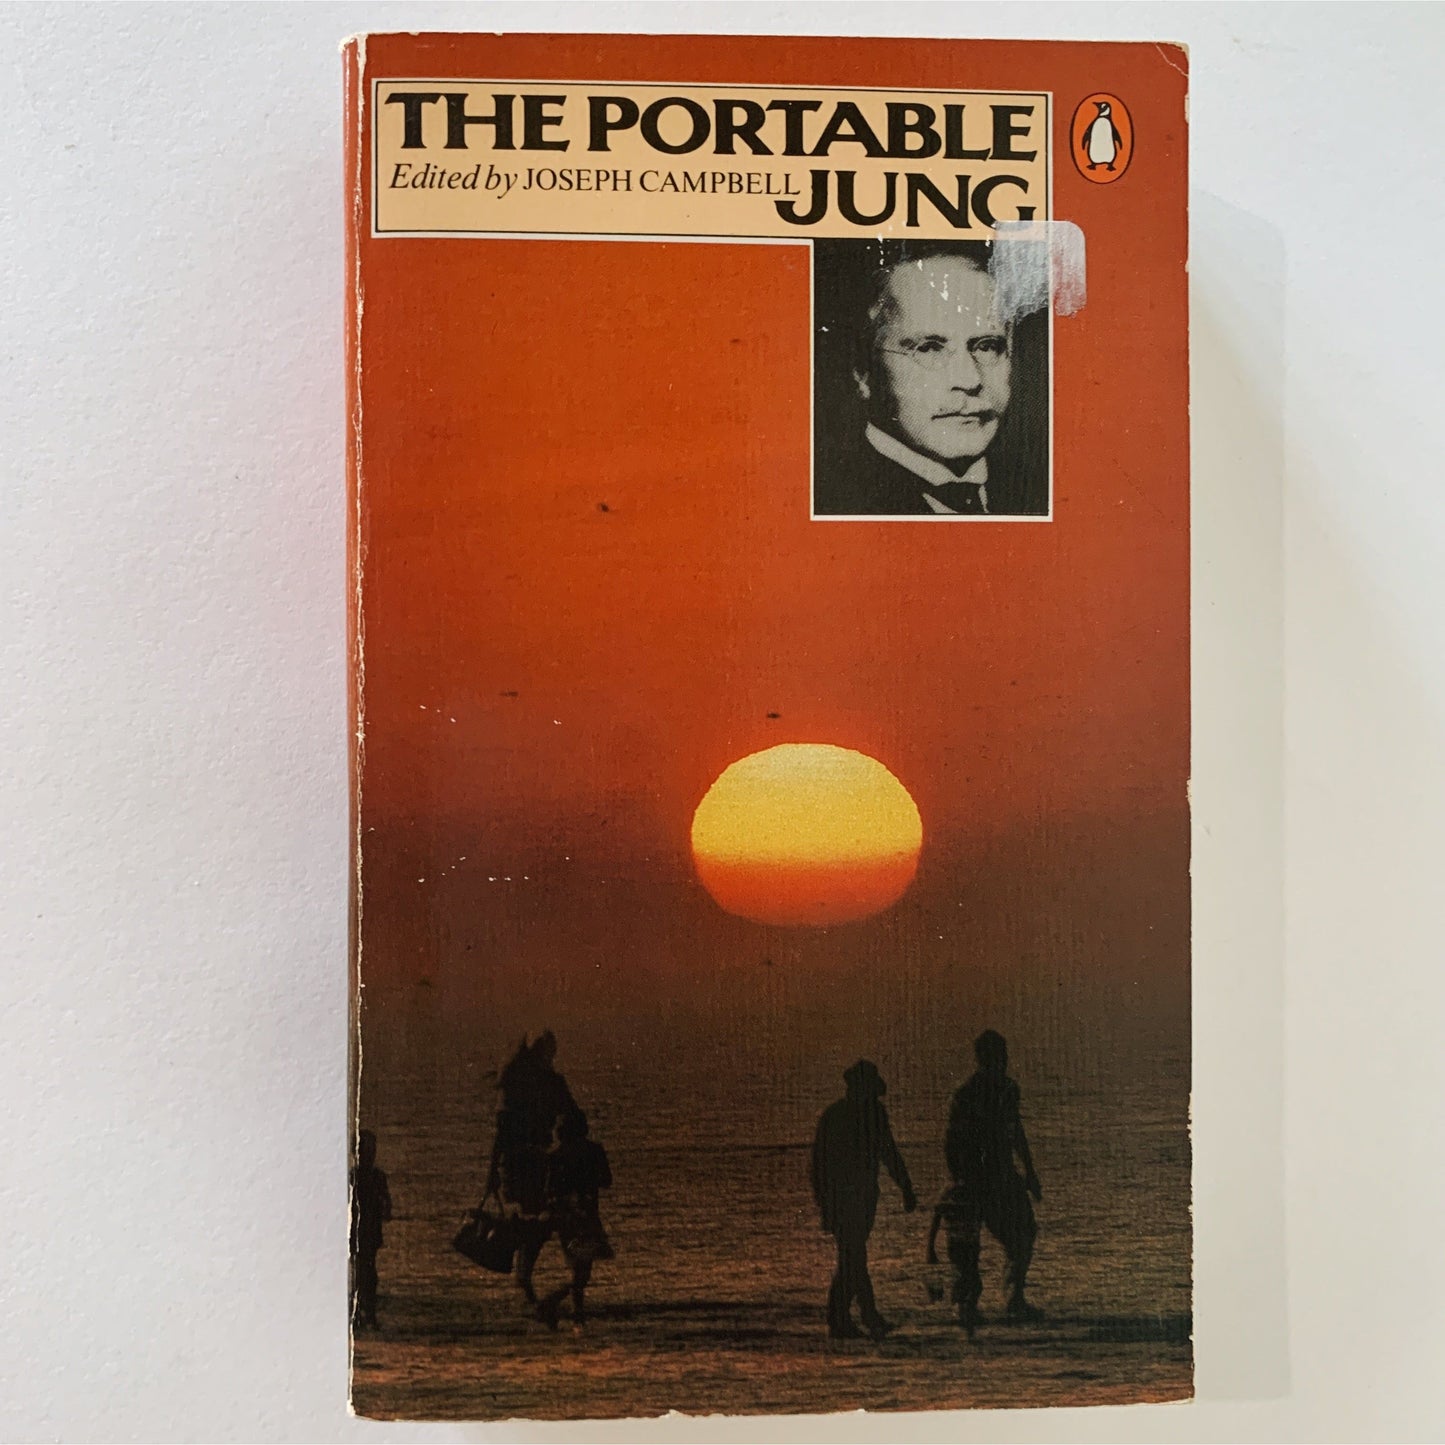 The Portable Jung, Edited by Joseph Campbell, 1987